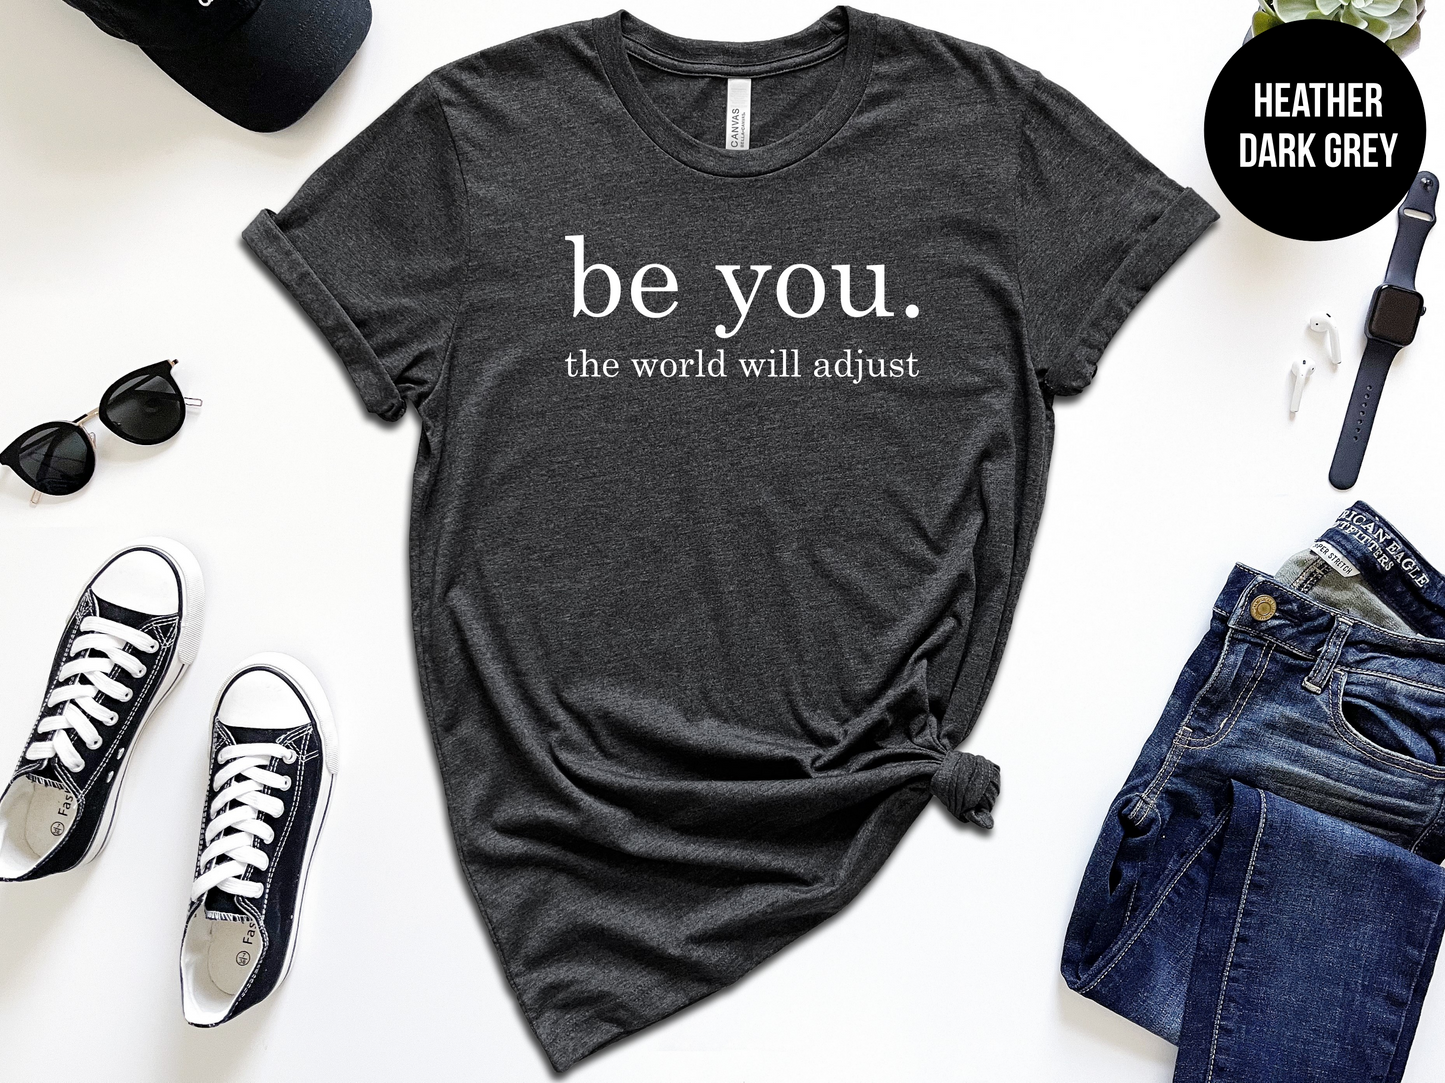 Be You. The World Will Adjust